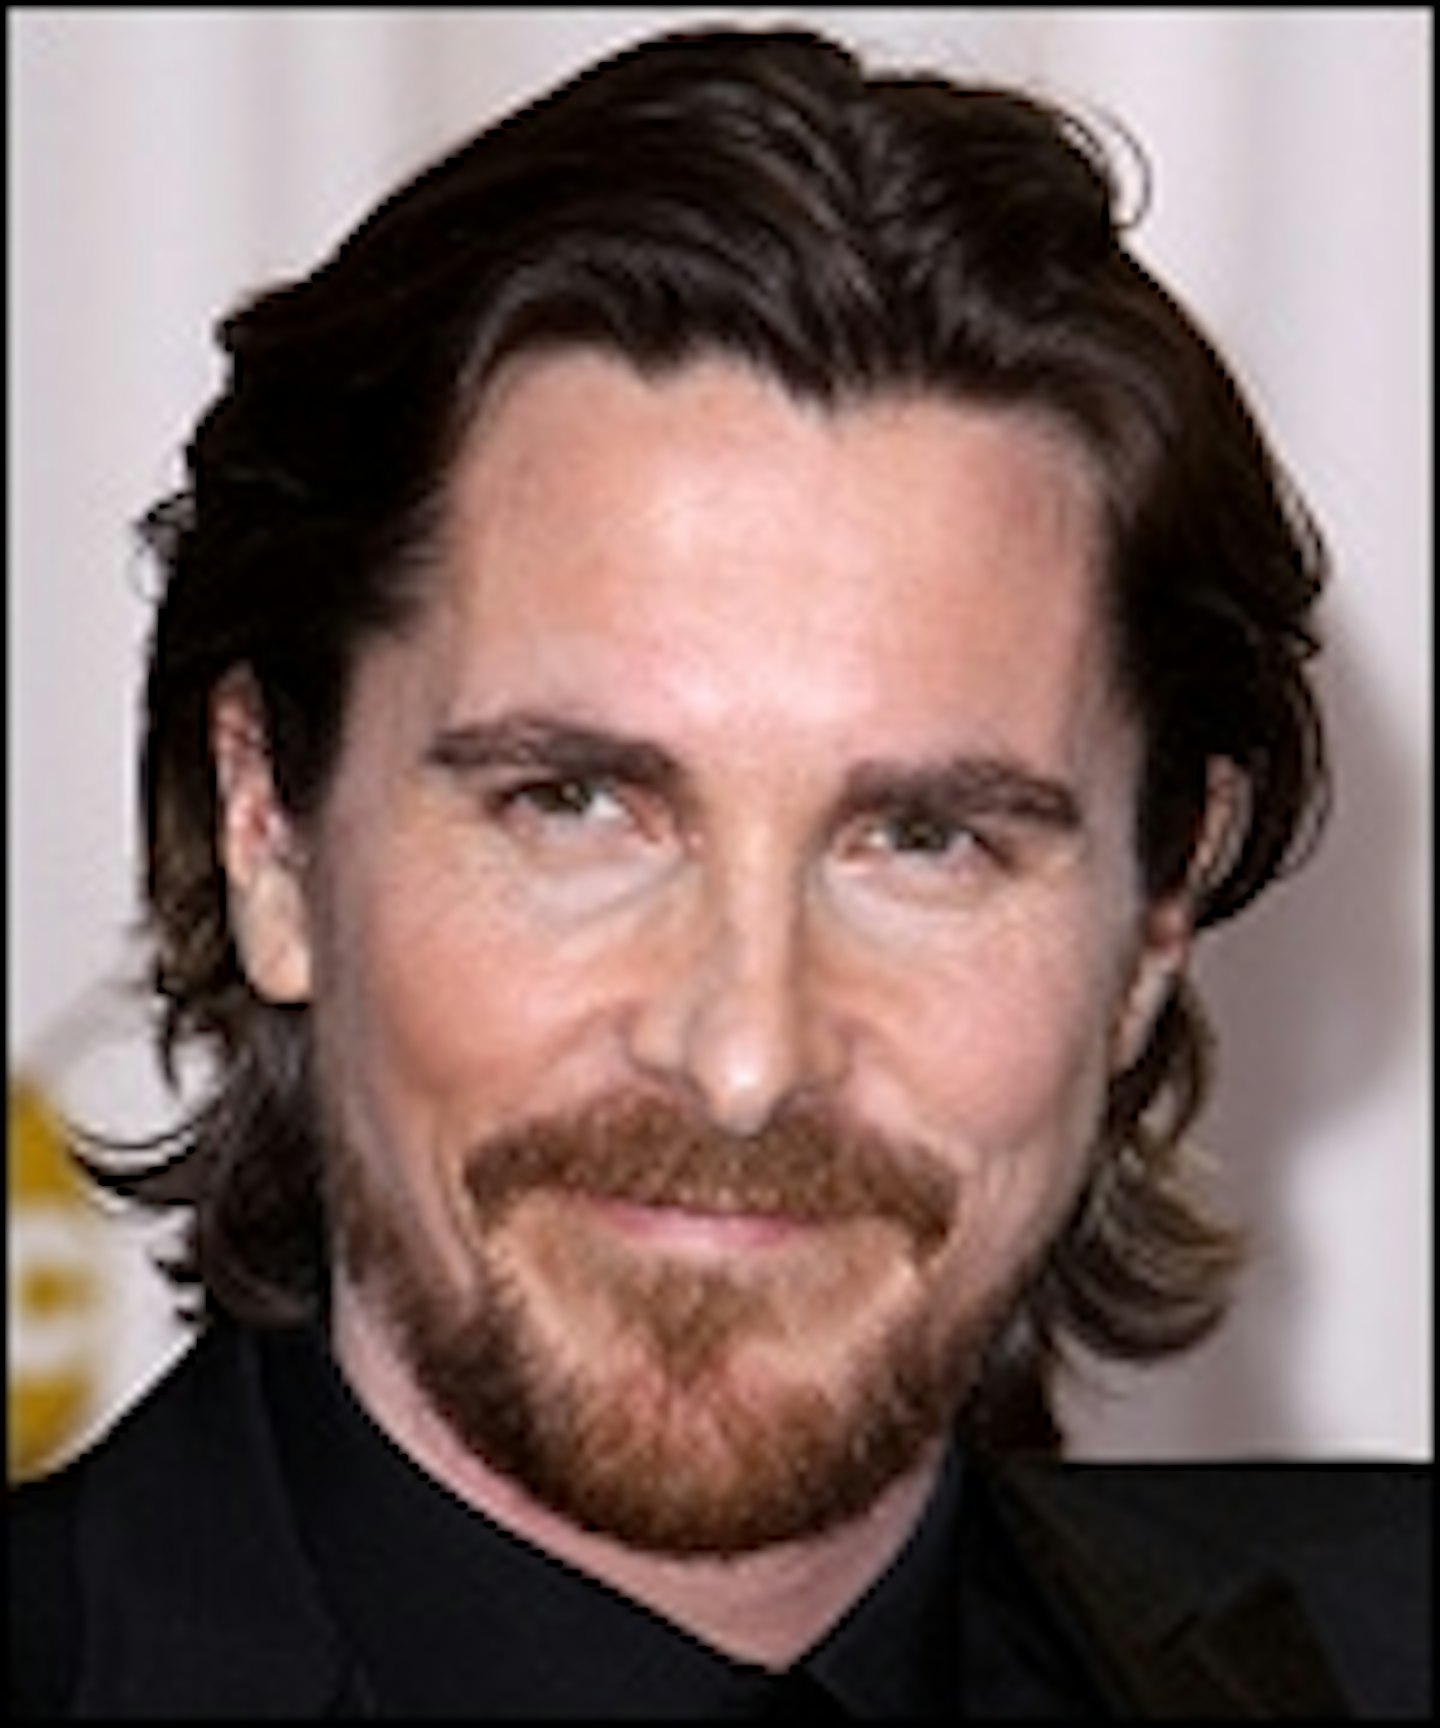 Christian Bale In Talks For The Deep Blue Good-By